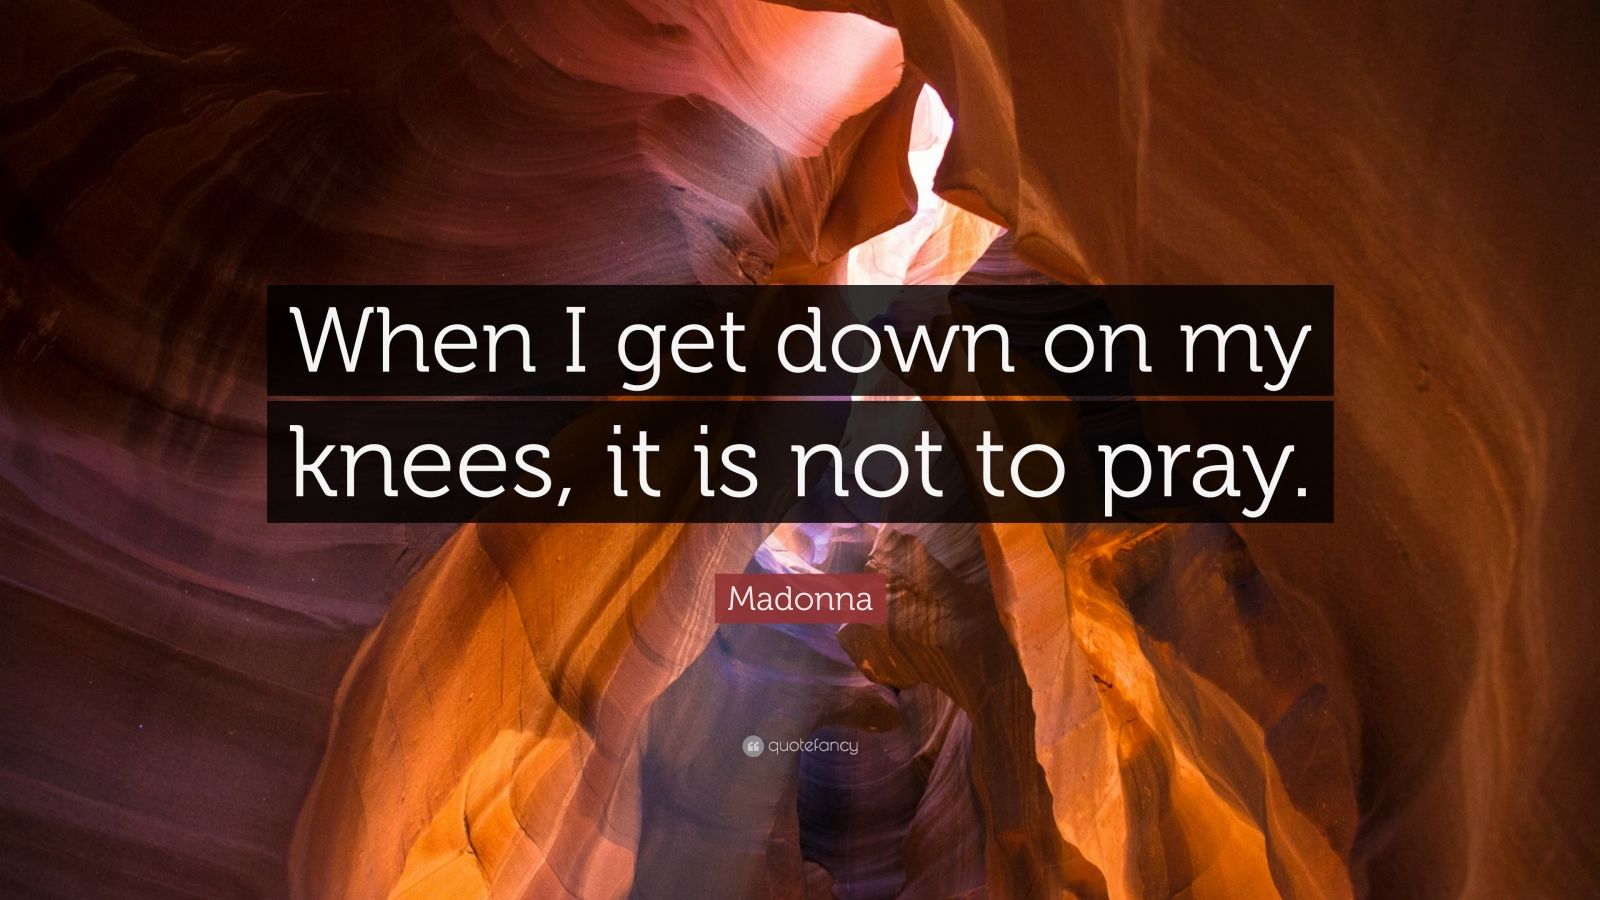 Madonna Quote “when I Get Down On My Knees It Is Not To Pray” 12 Wallpapers Quotefancy 4808